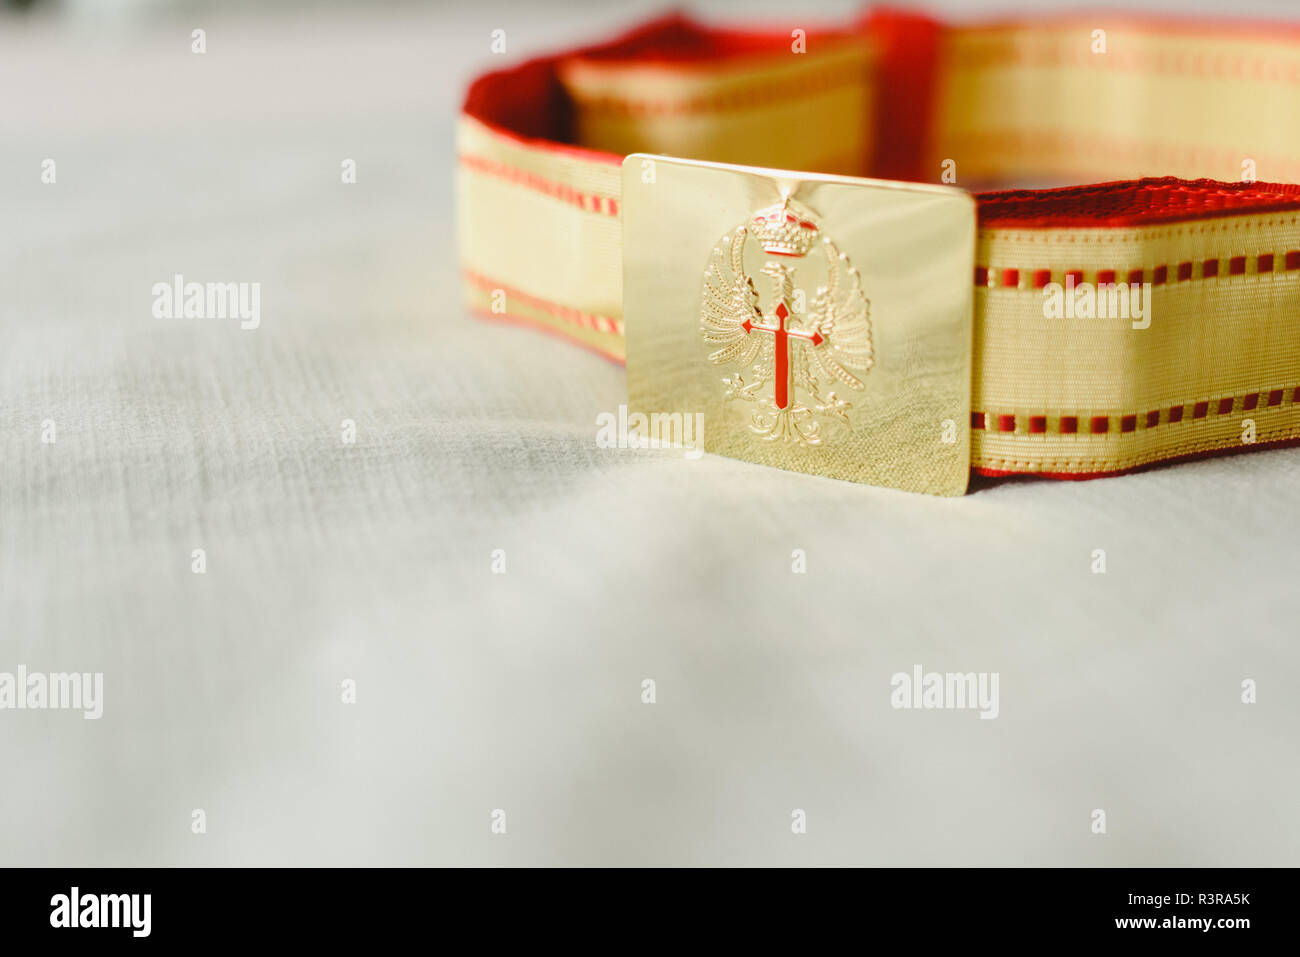 Golden belt of the military army Stock Photo